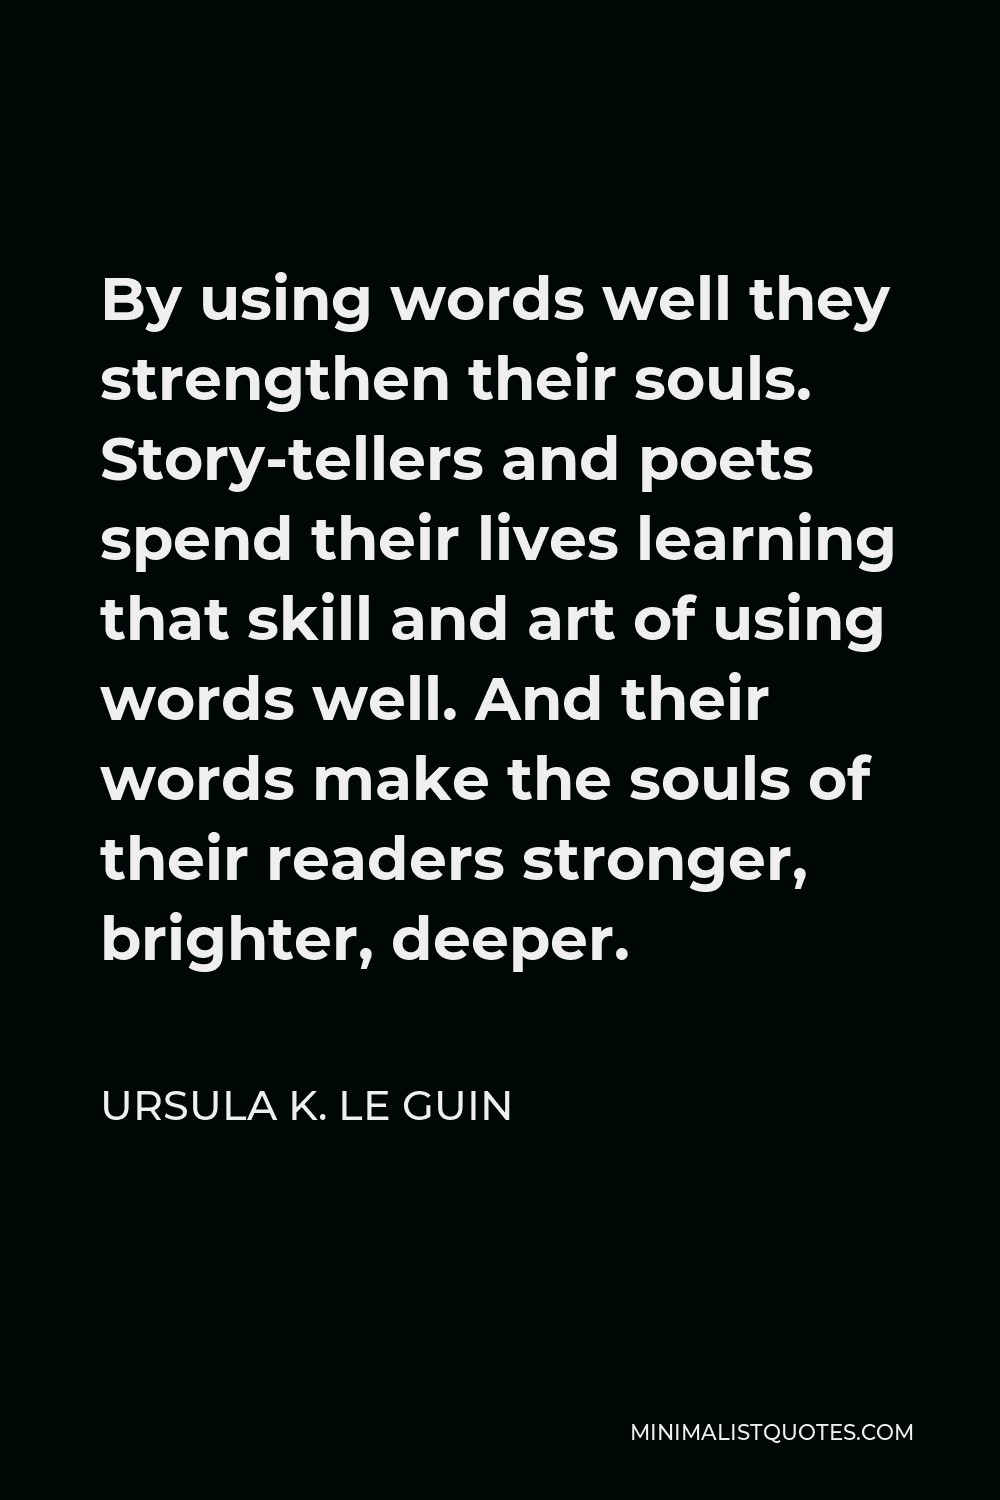 Ursula K. Le Guin Quote - By using words well they strengthen their souls. Story-tellers and poets spend their lives learning that skill and art of using words well. And their words make the souls of their readers stronger, brighter, deeper.